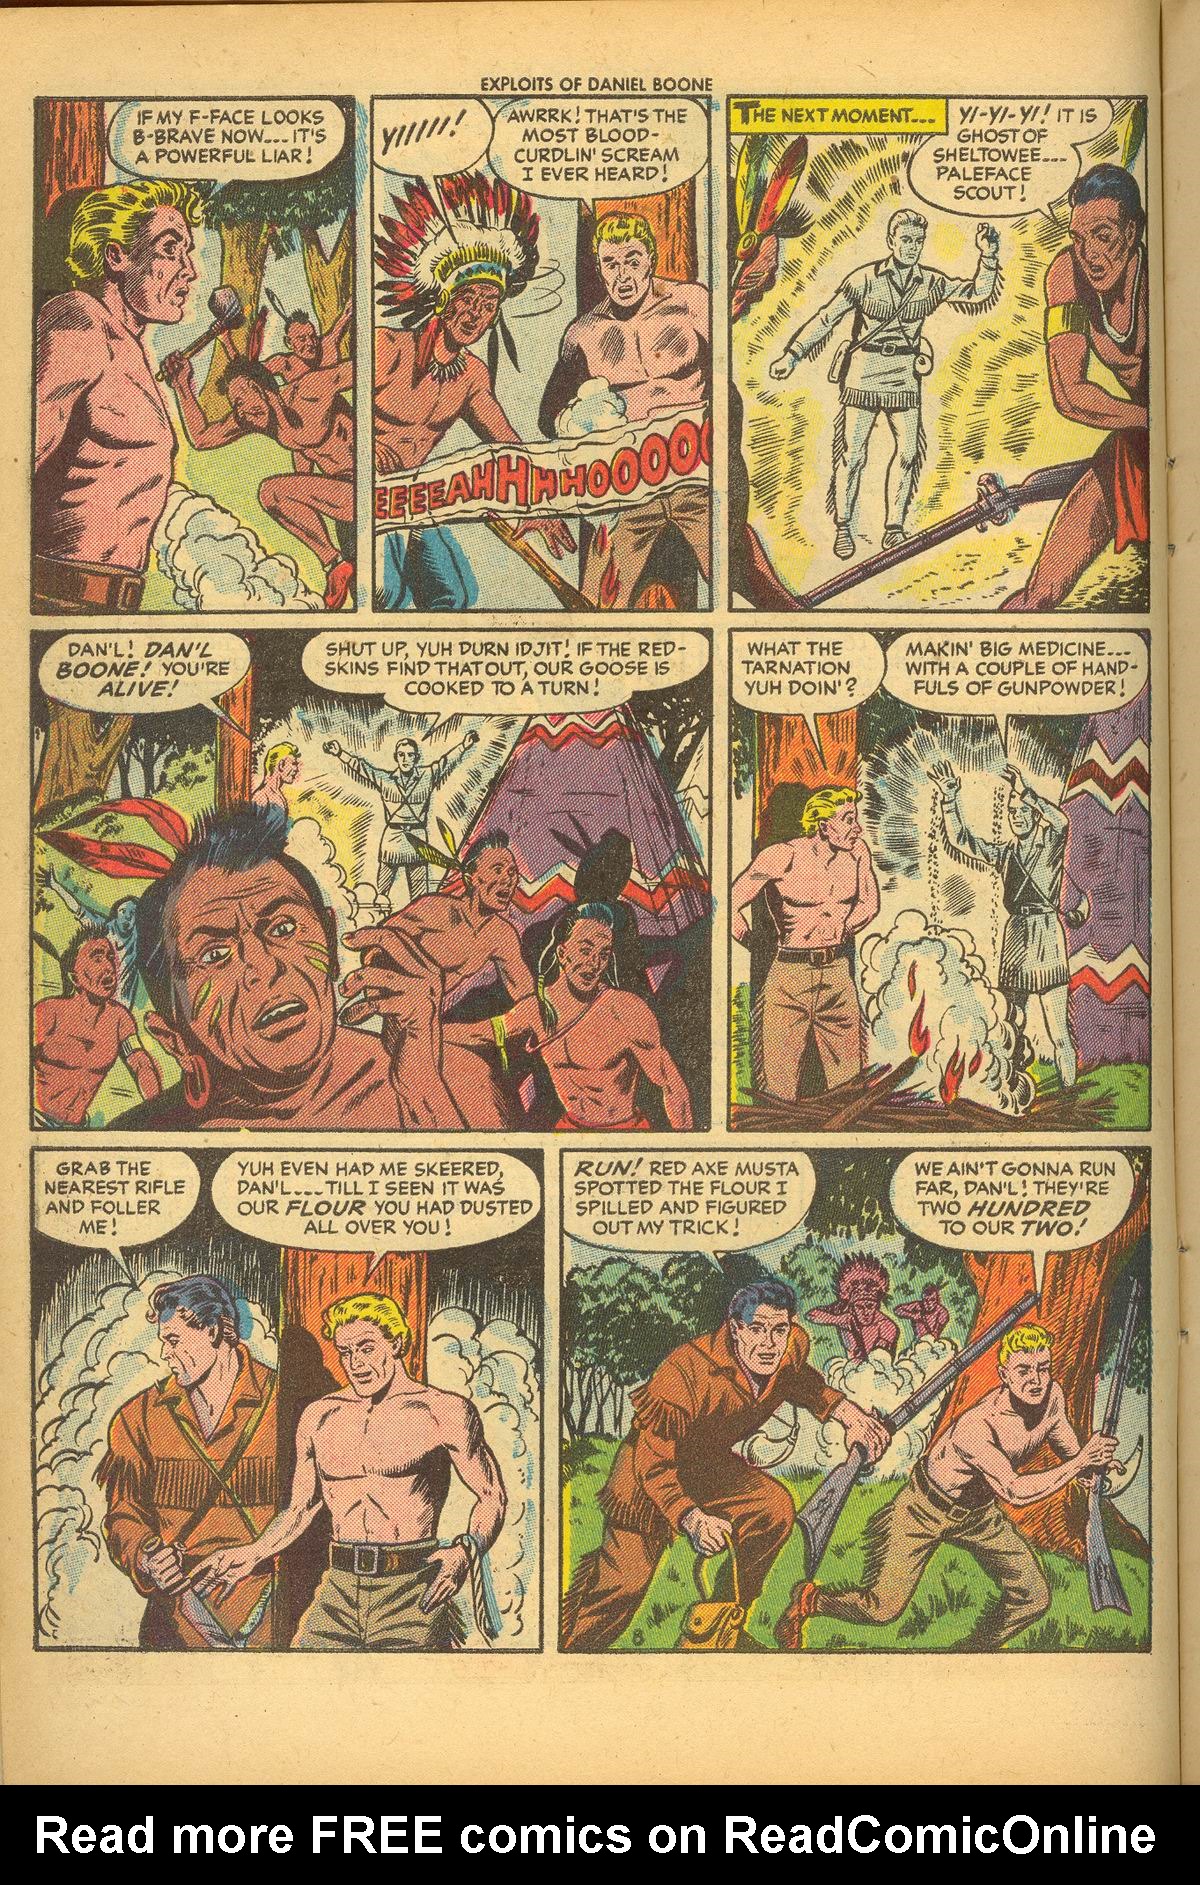 Read online Exploits of Daniel Boone comic -  Issue #2 - 10